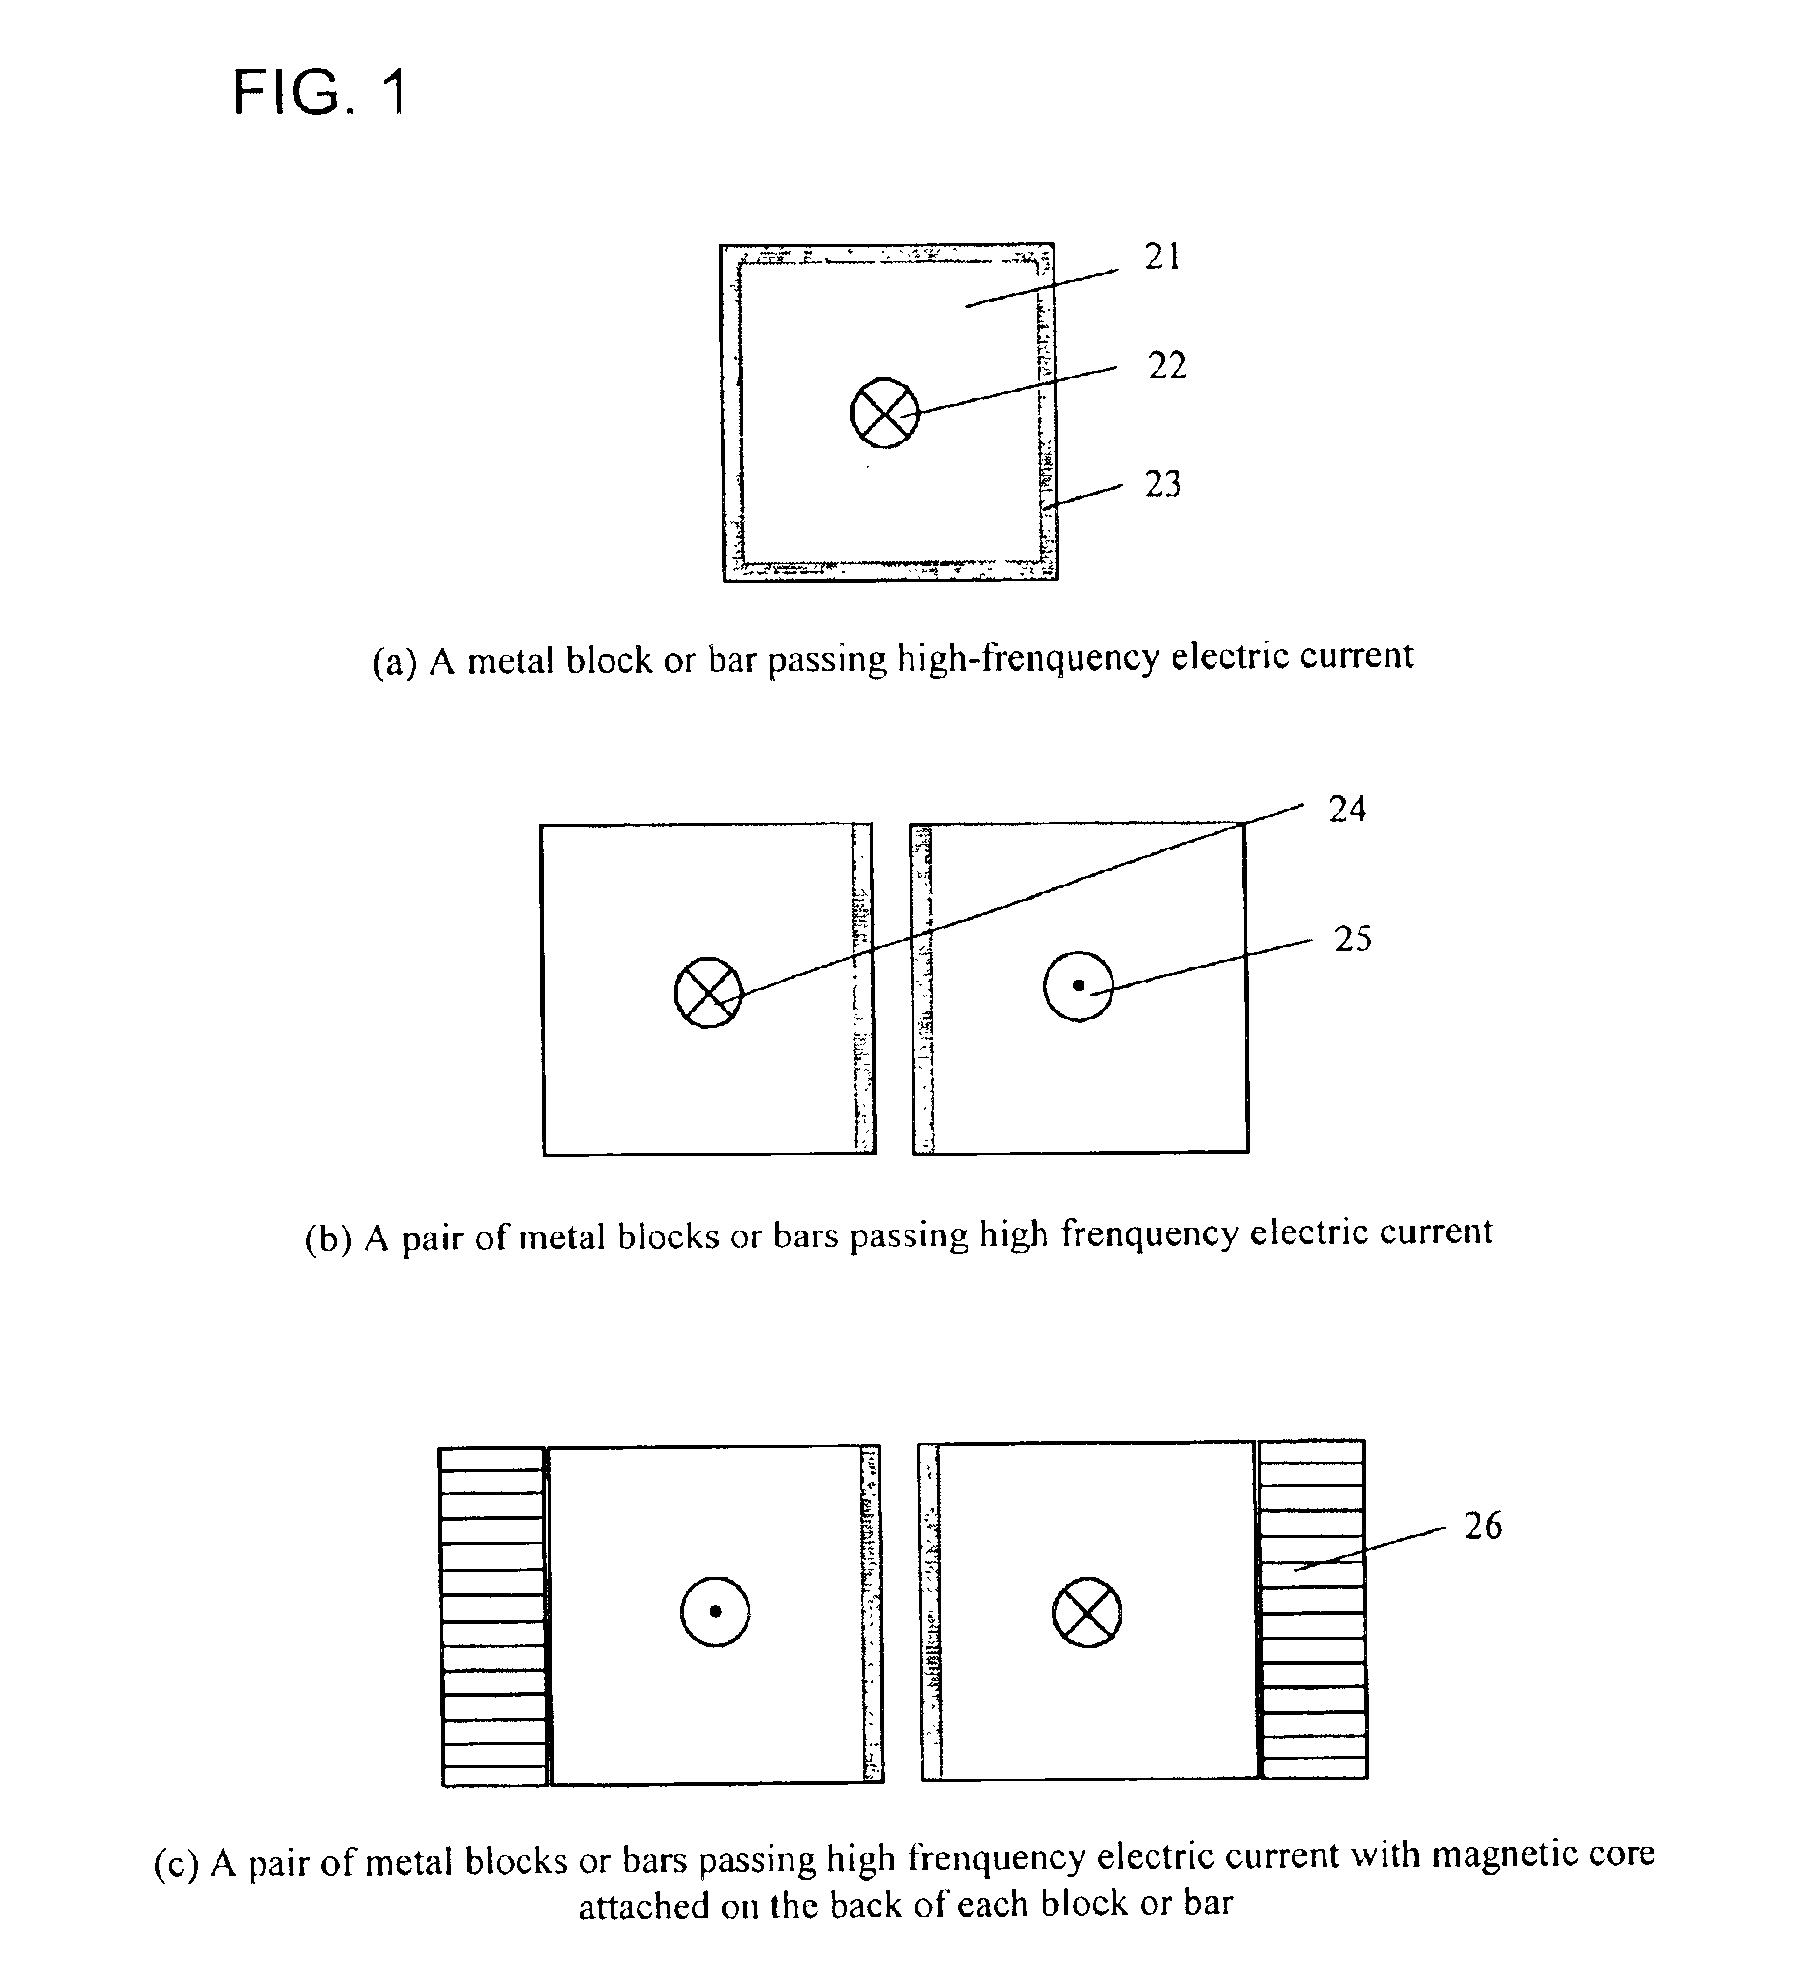 Method for rapid mold heating and cooling